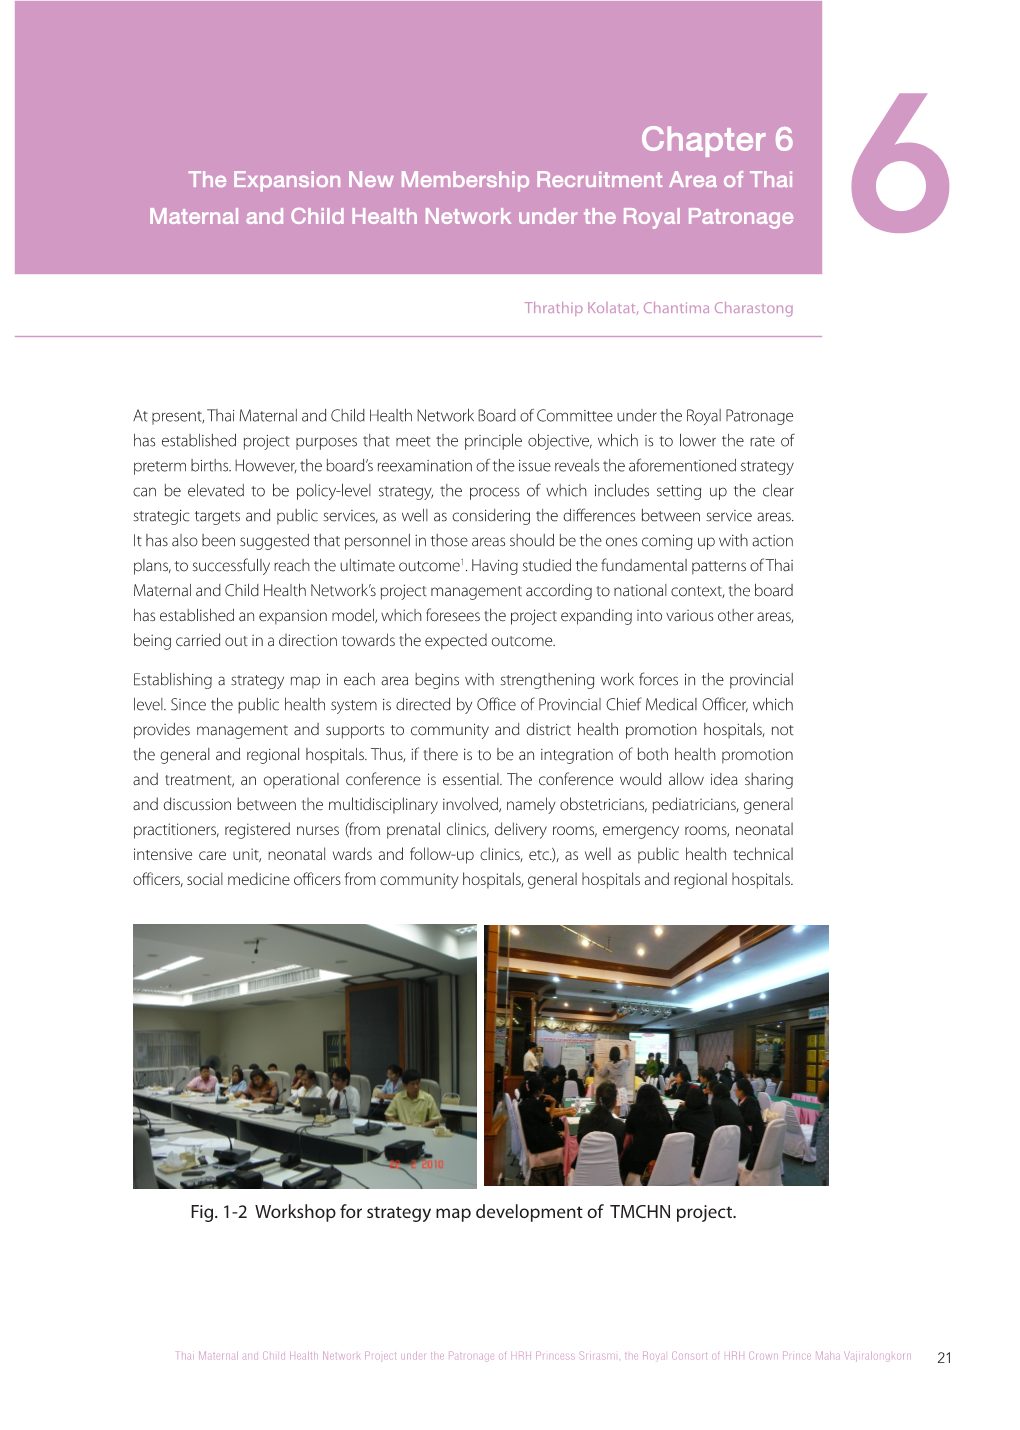 Chapter 6 the Expansion New Membership Recruitment Area of Thai Maternal and Child Health Network Under the Royal Patronage 6